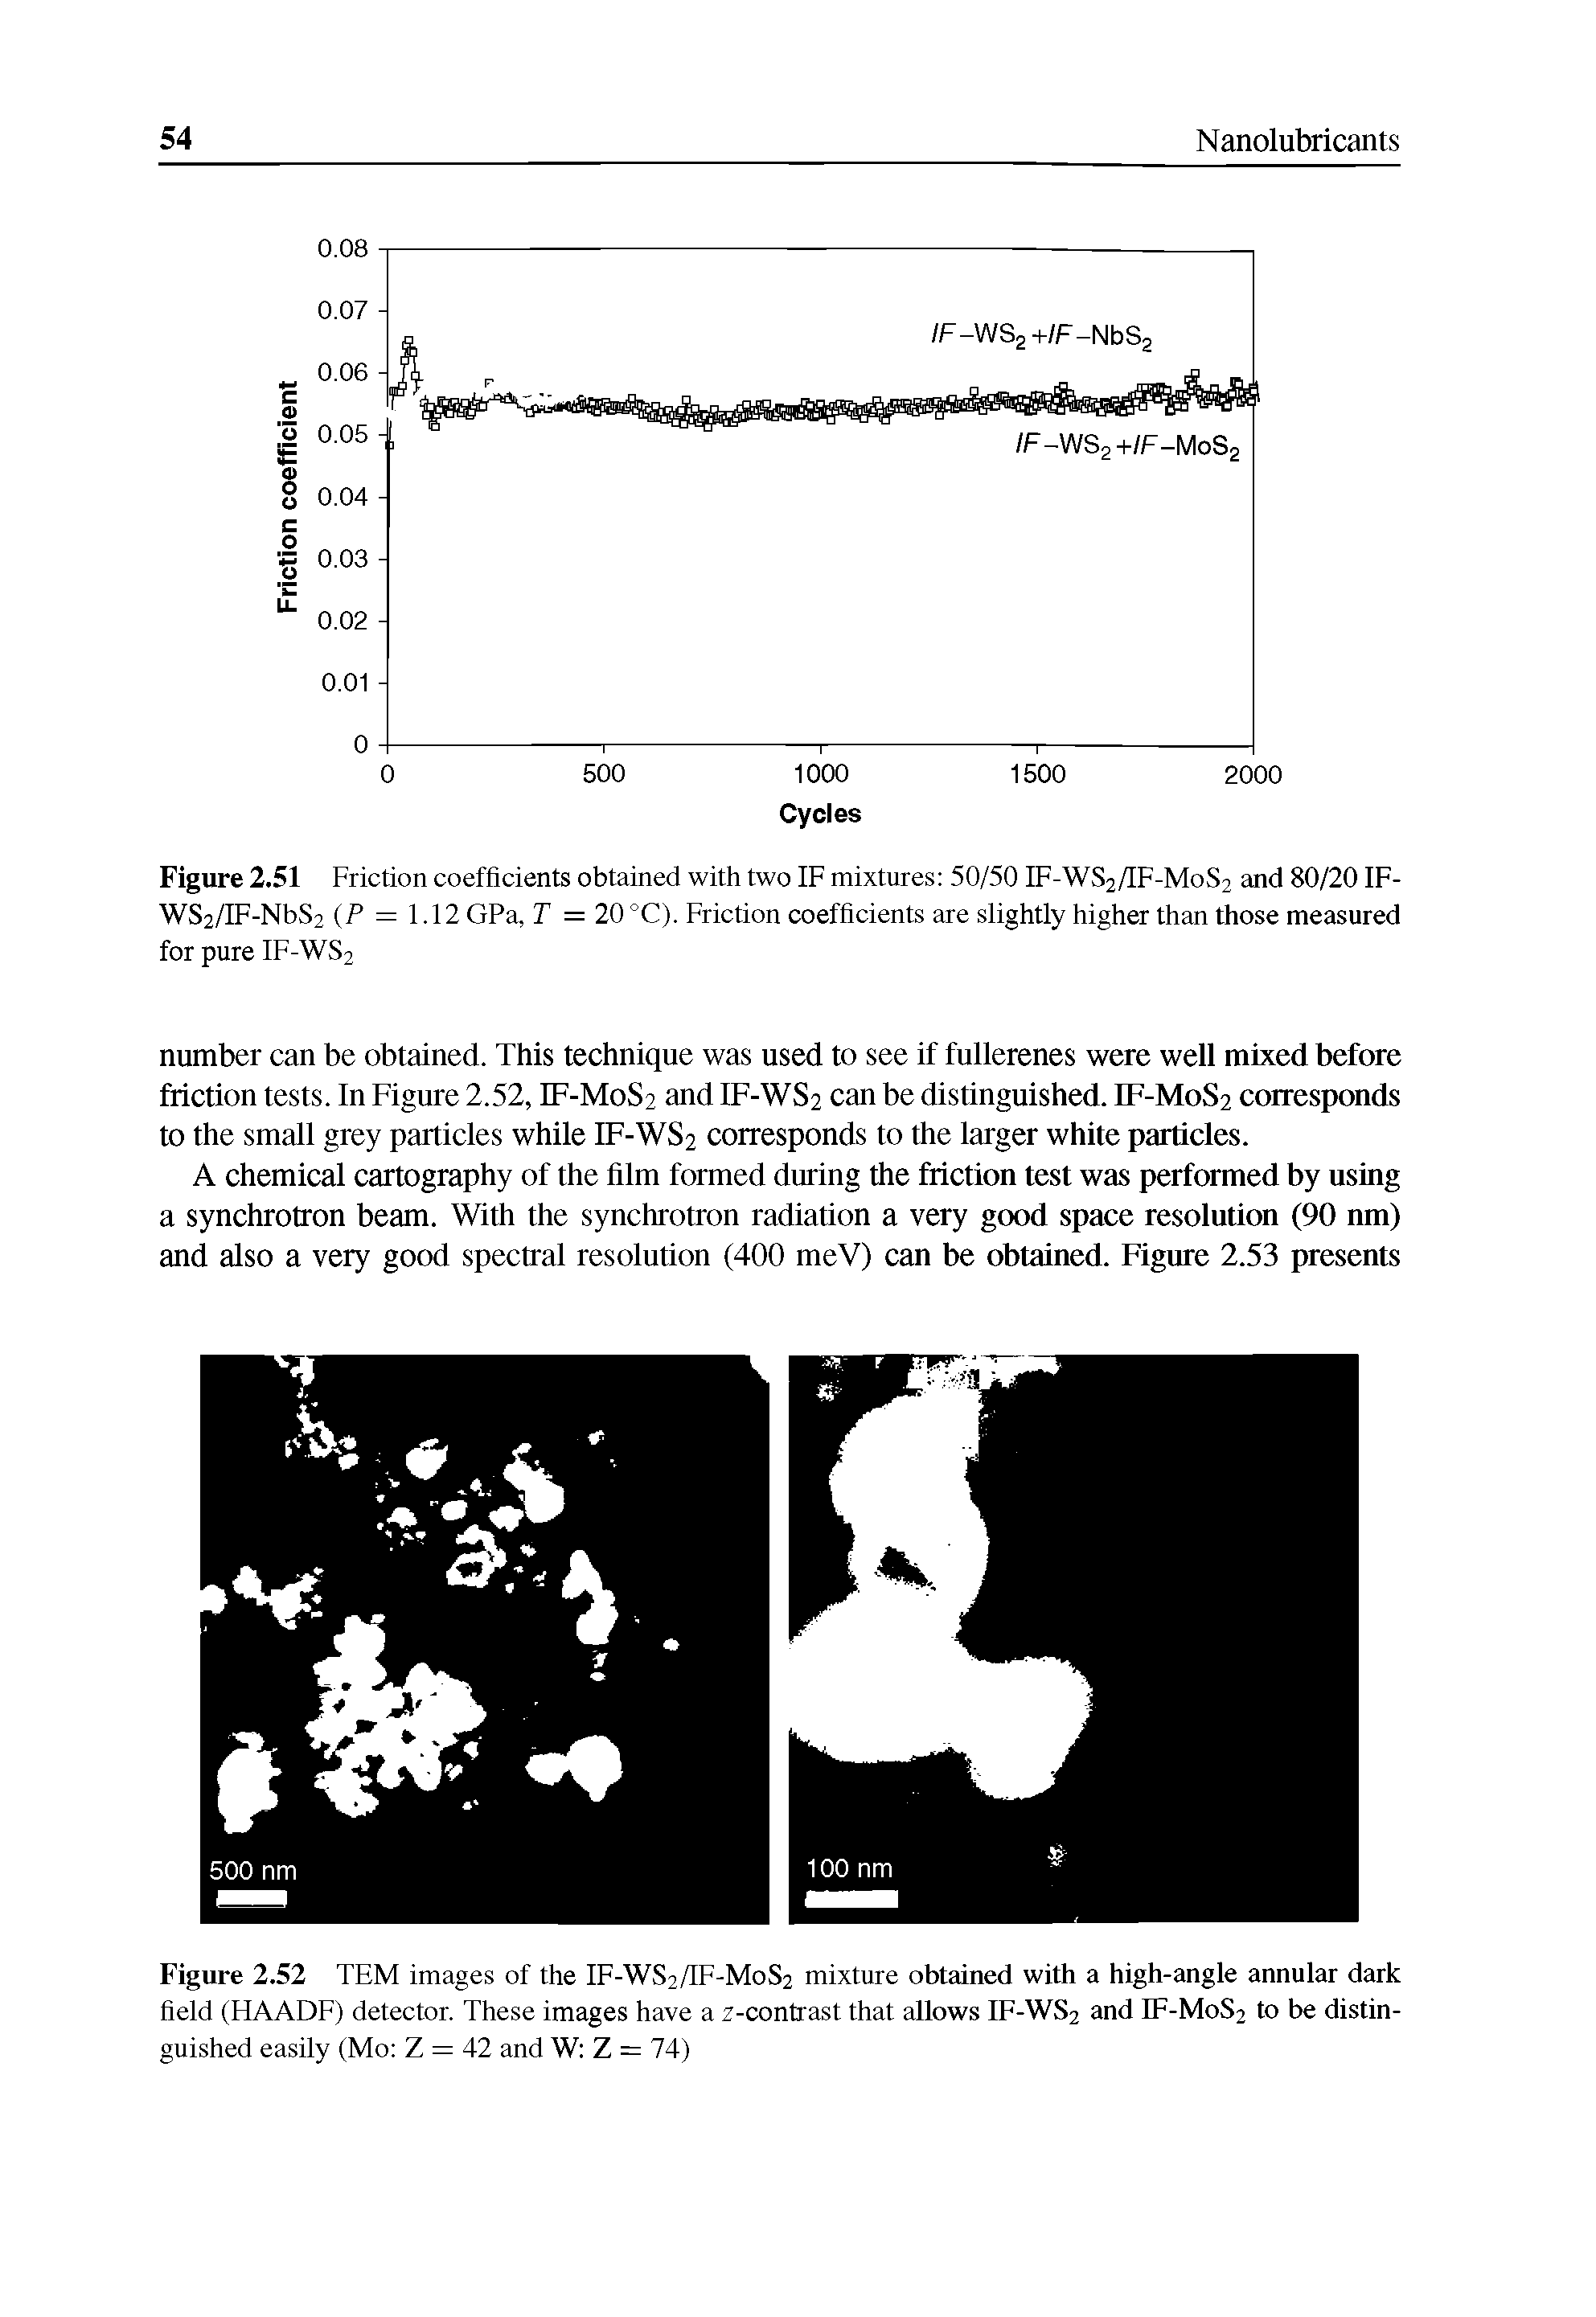 Figure 2.52 TEM images of the IF-WS2/IF-M0S2 mixture obtained with a high-angle annular dark field (HAADF) detector. These images have a z-contrast that allows IF-WS2 and IF-M0S2 to be distinguished easily (Mo Z = 42 and W Z = 74)...